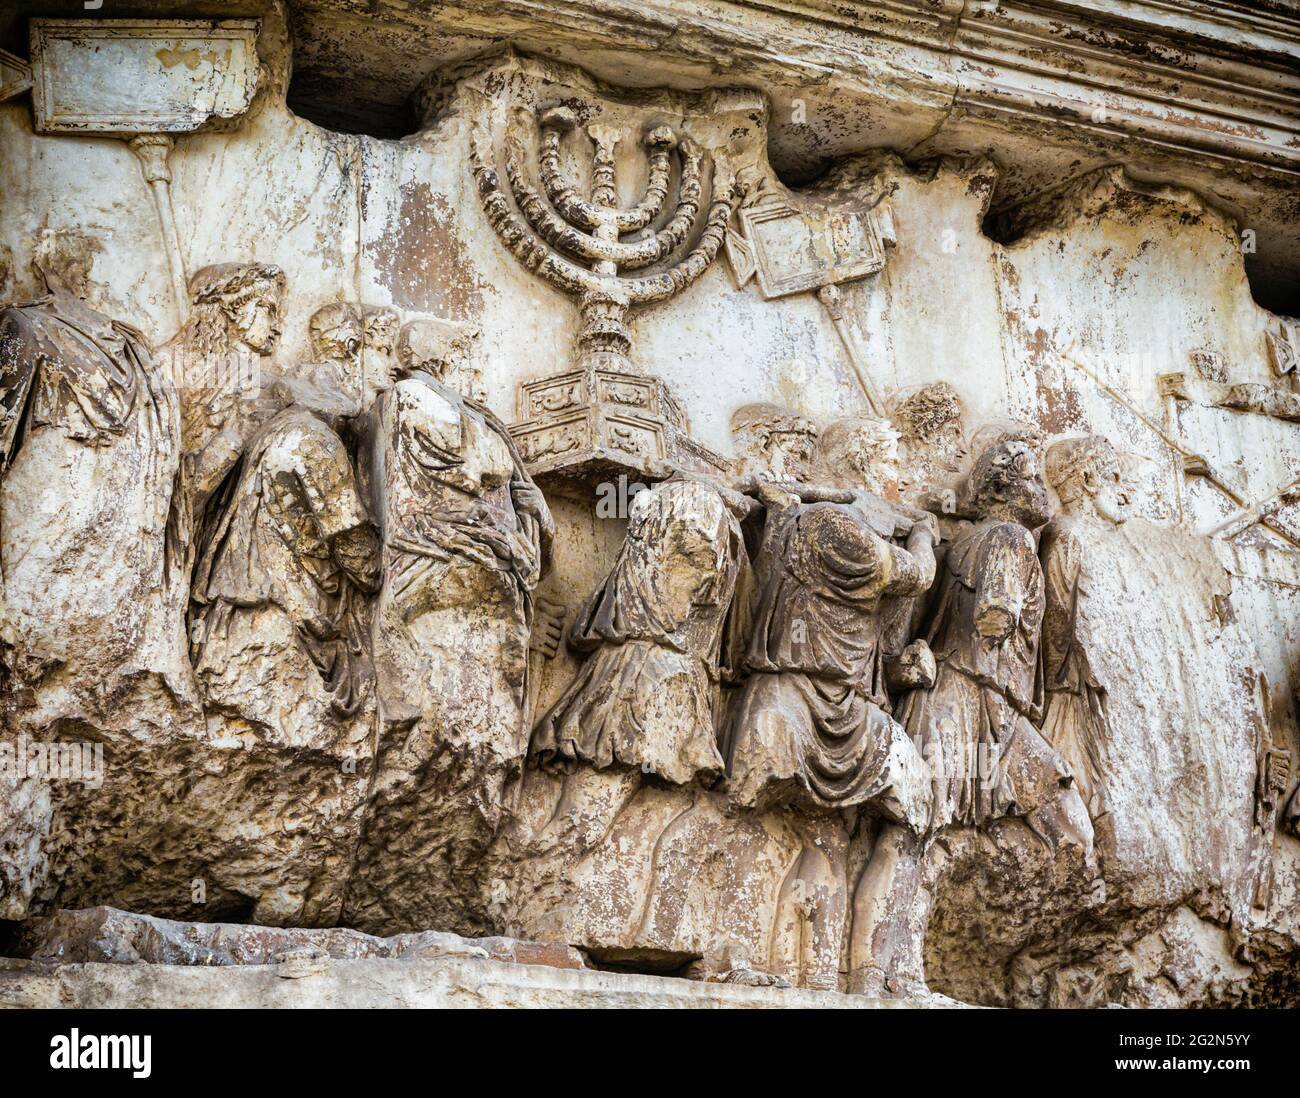 Rome, Italy.  The procession panel on the Arch of Titus in the Roman Forum.  The Arch was built after Titus's death to commemorate his conquest of Jud Stock Photo